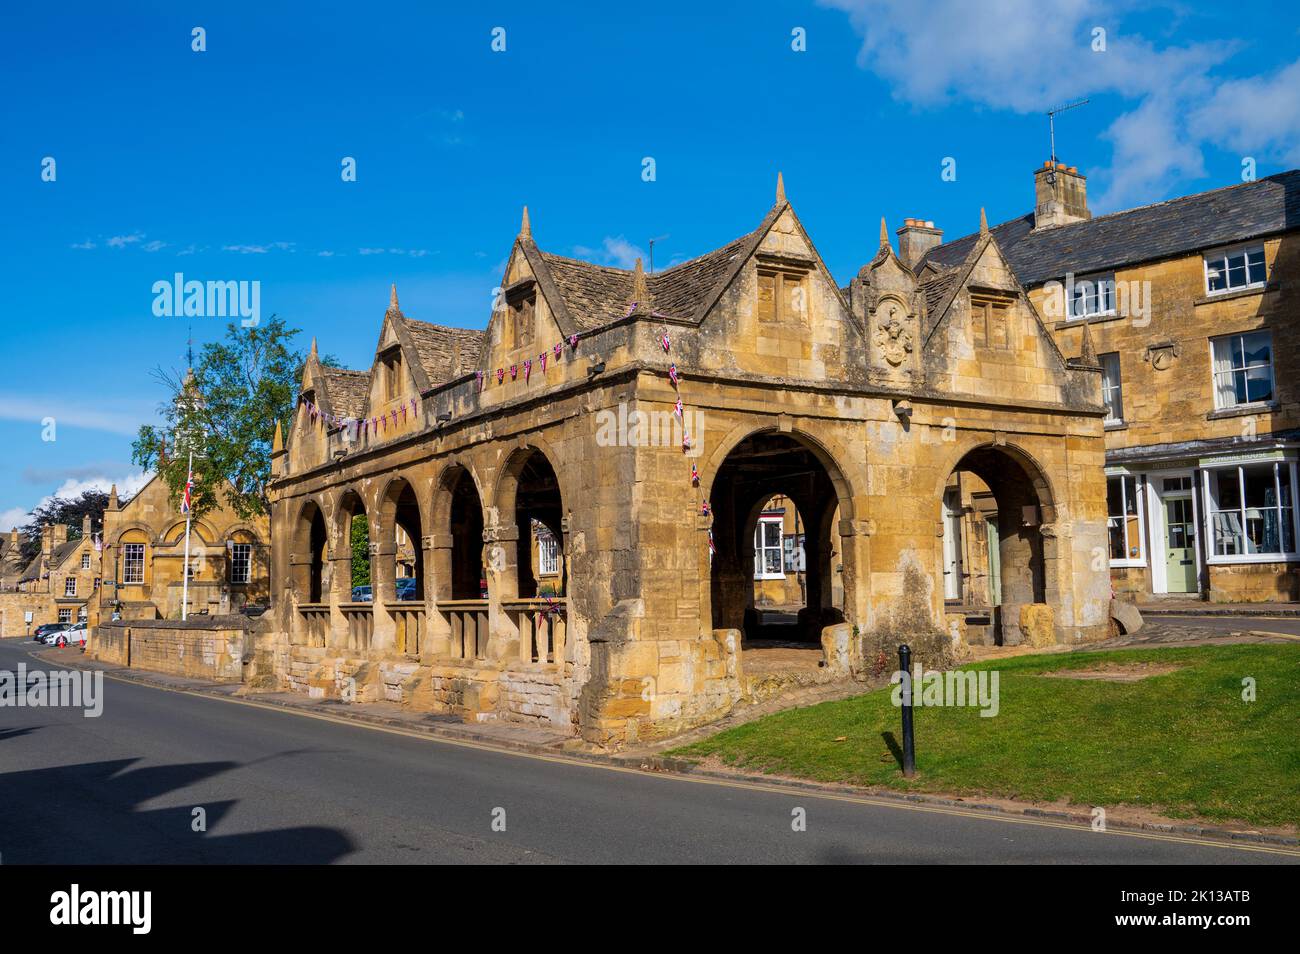 Market Hall and Cotswold stone cottages on High Street, Chipping Campden, Cotswolds, Gloucestershire, England, United Kingdom, Europe Stock Photo